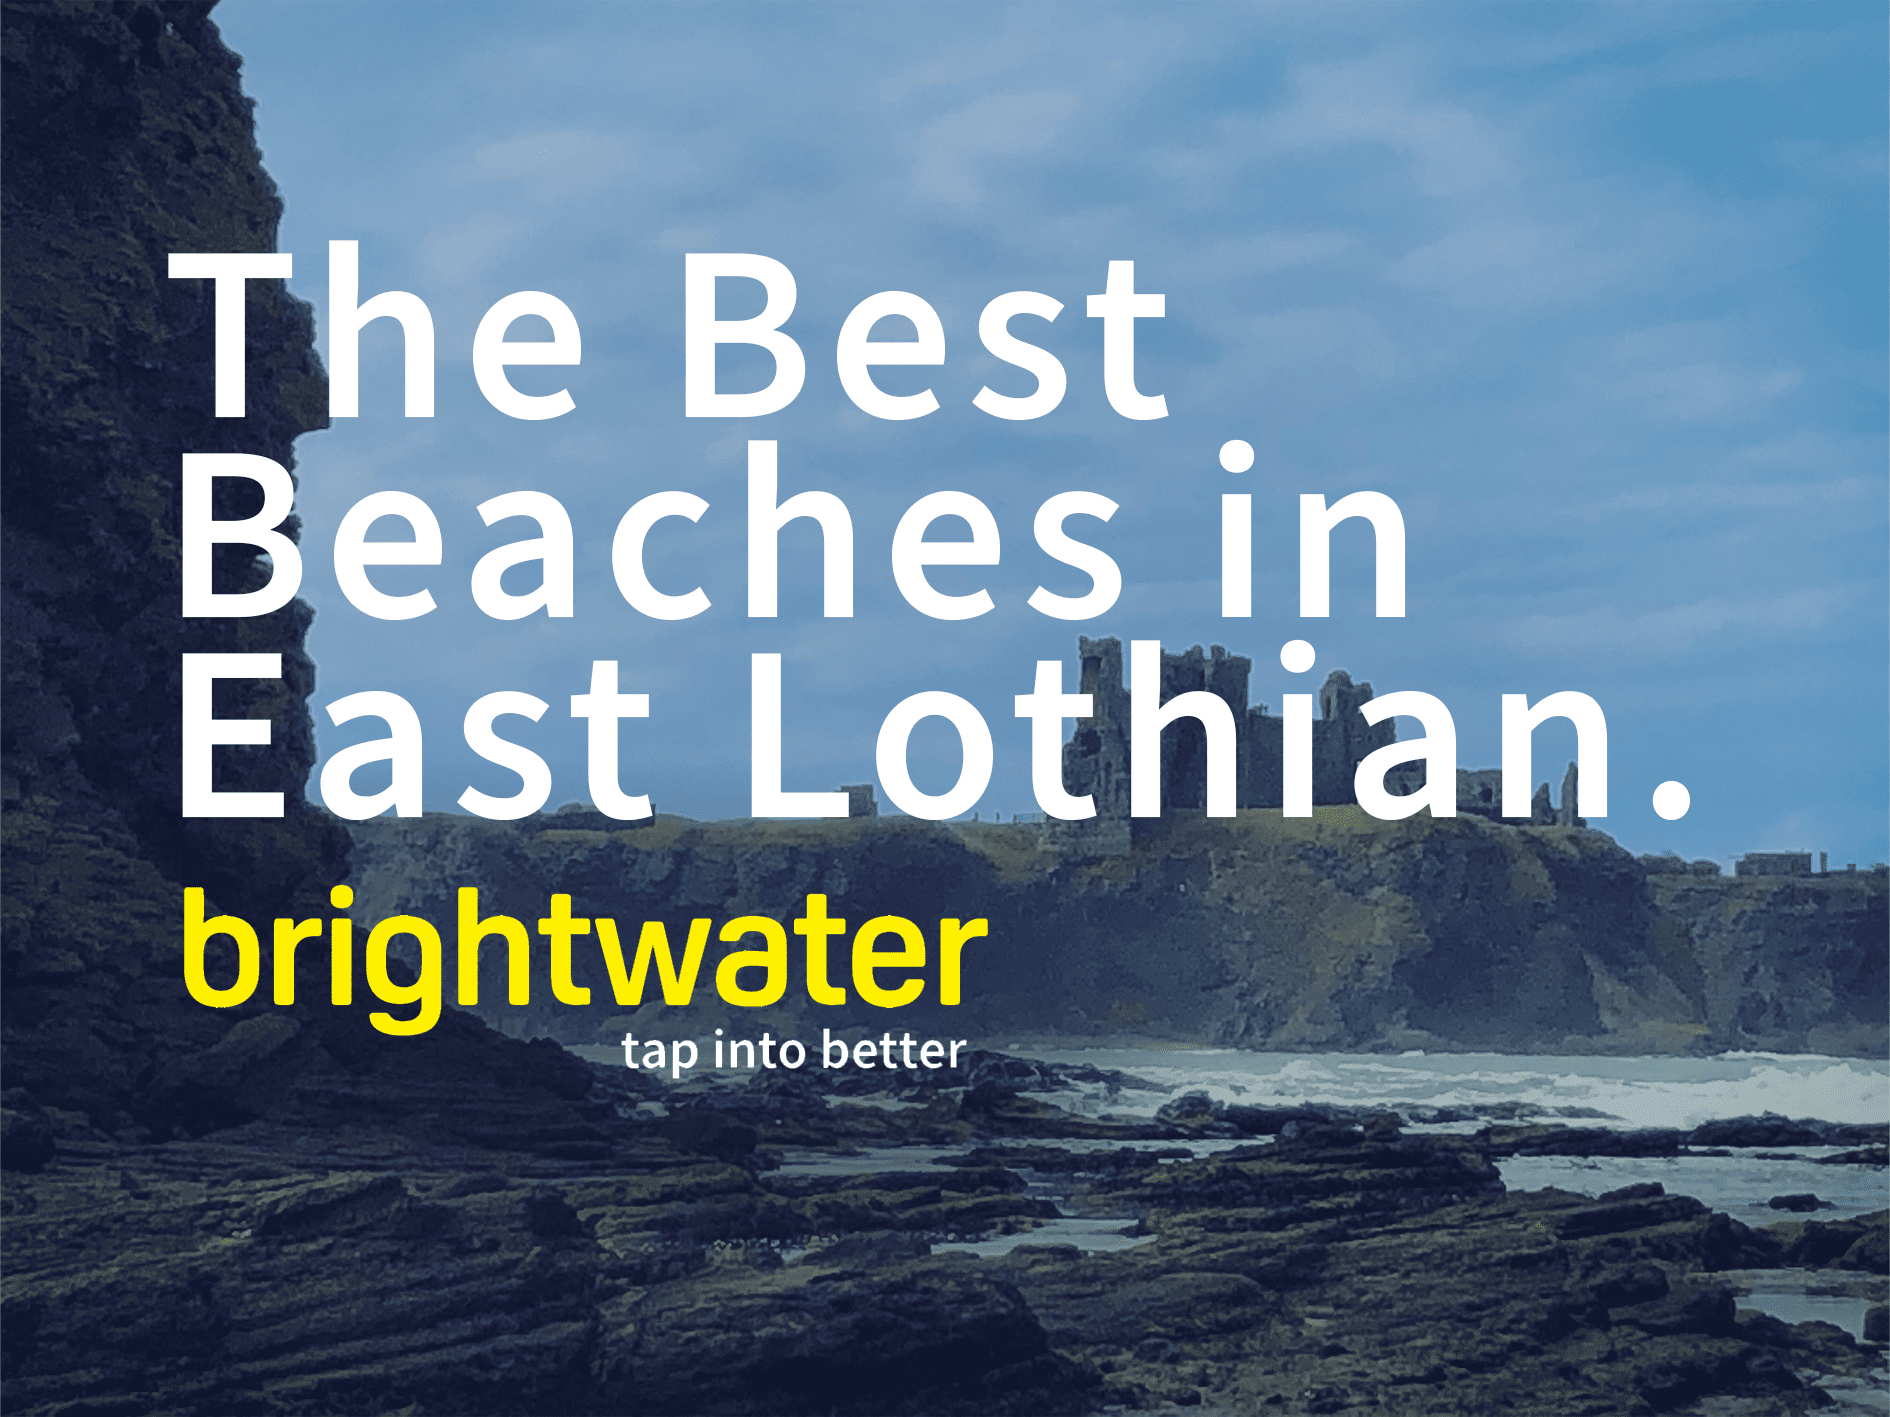 The Best Beaches in East Lothian.